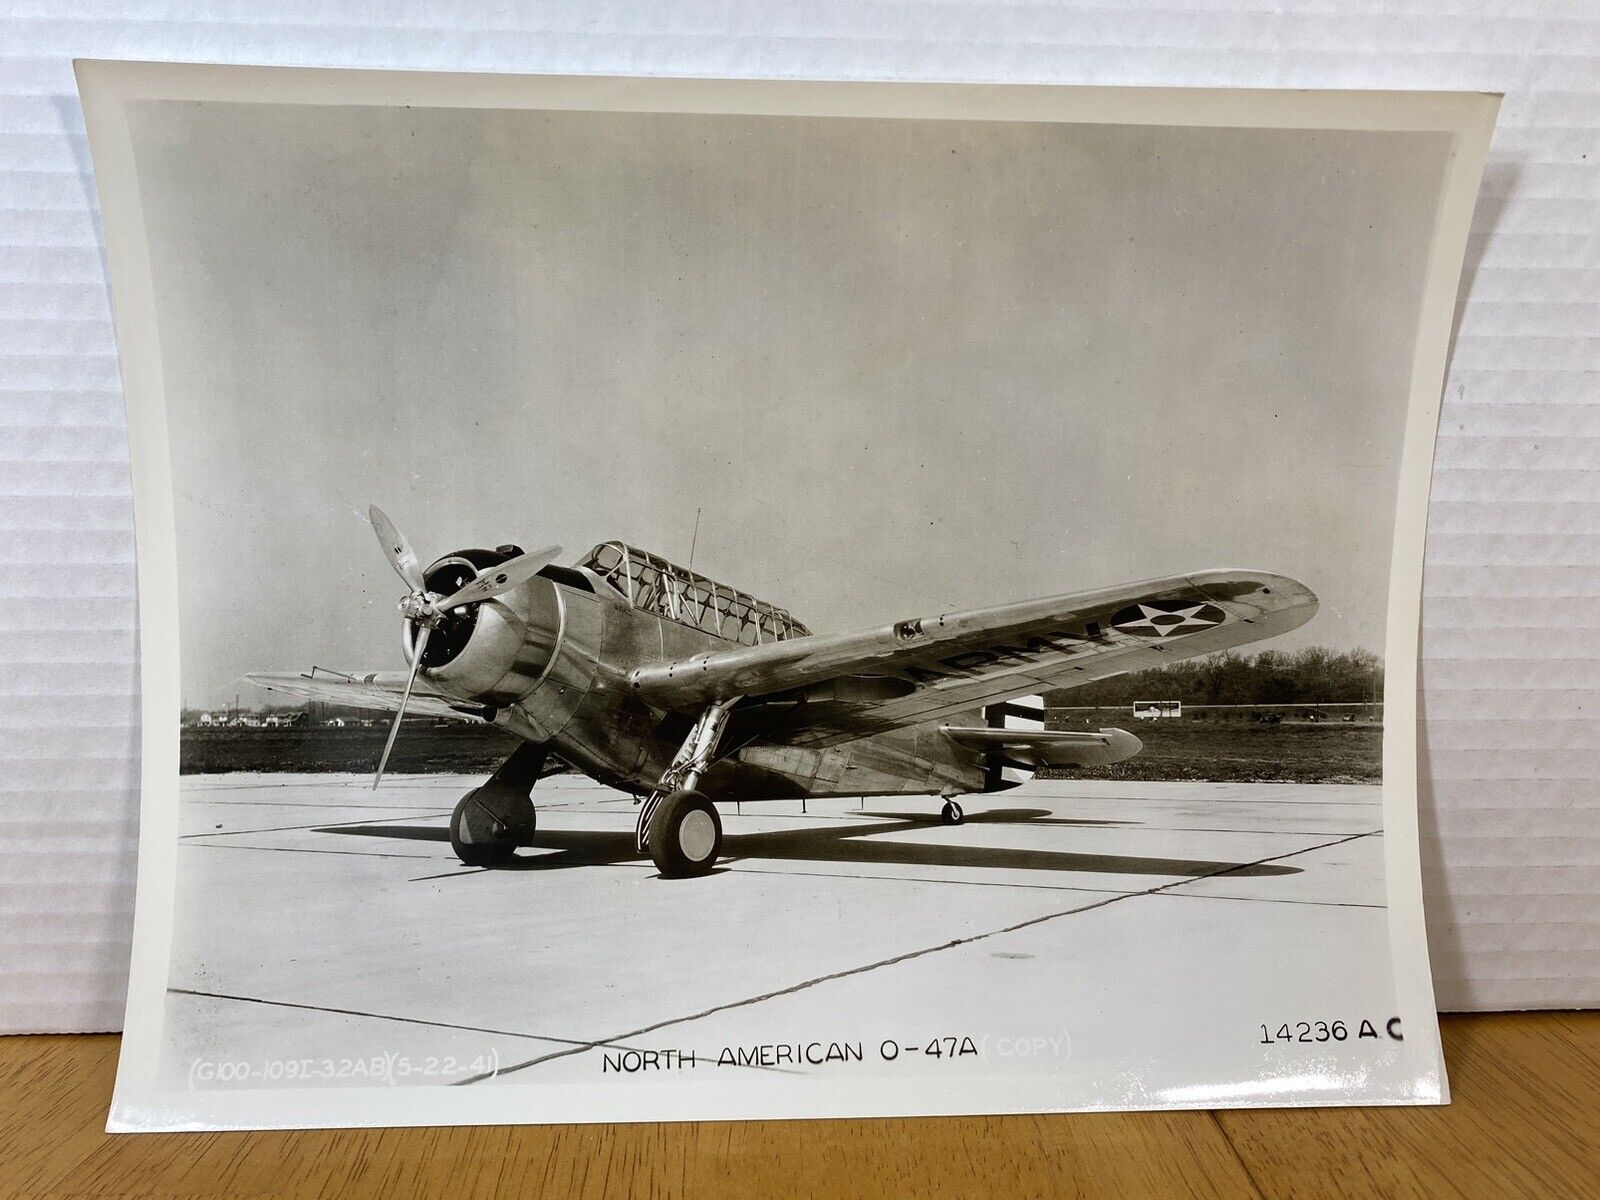 O-47 A NORTH AMERICAN OBSERVATION AIRCRAFT AVIATION INC. 5-2-41 Stamp E.W WIEDLE